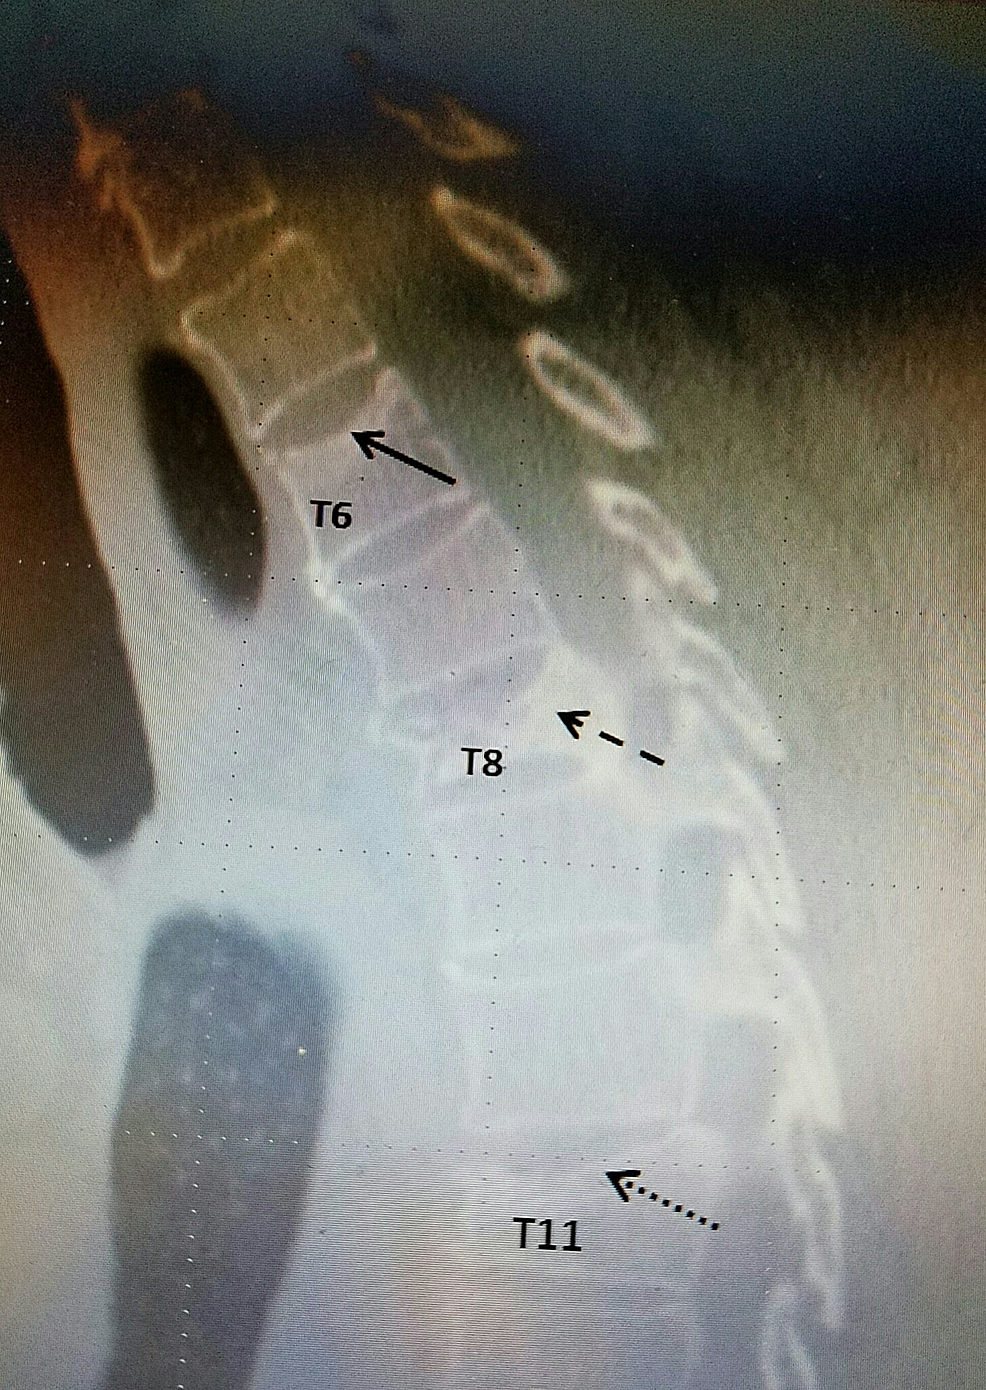 old t8 compression fracture treatment